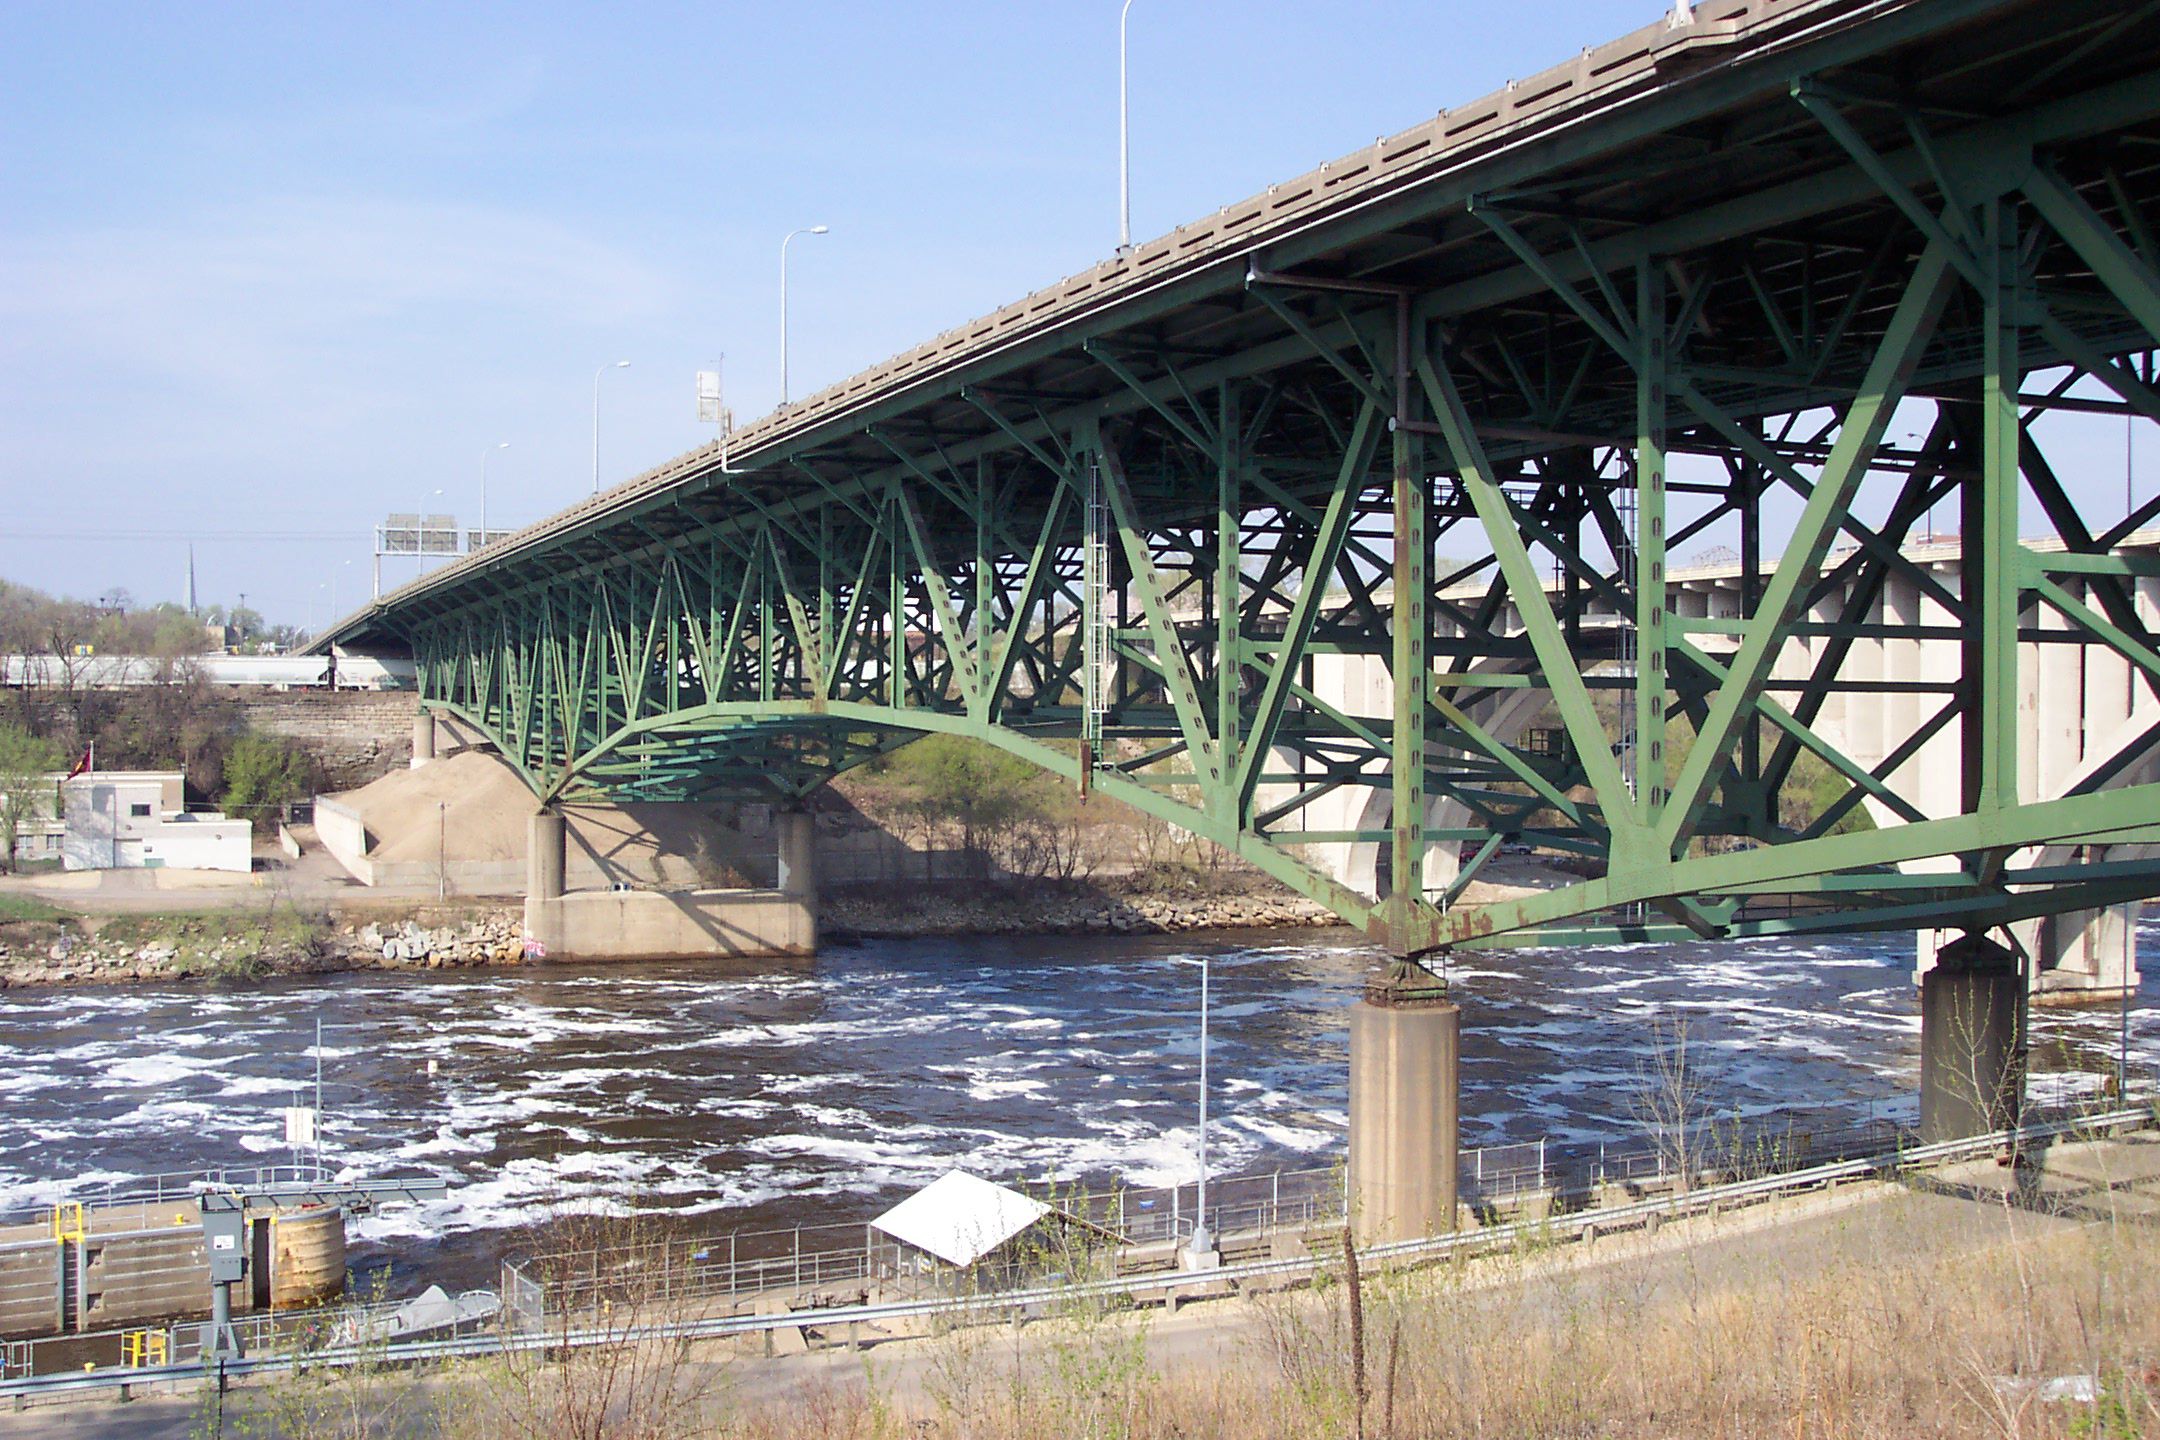 This 2005 image provided by John Weeks III shows the I-35W bridge north of Minneapolis. The busy highway bridge that spans the Mississippi River just northeast of Minneapolis collapsed during rush hour Wednesday, Aug. 1, 2007 sending dozens of cars, tons